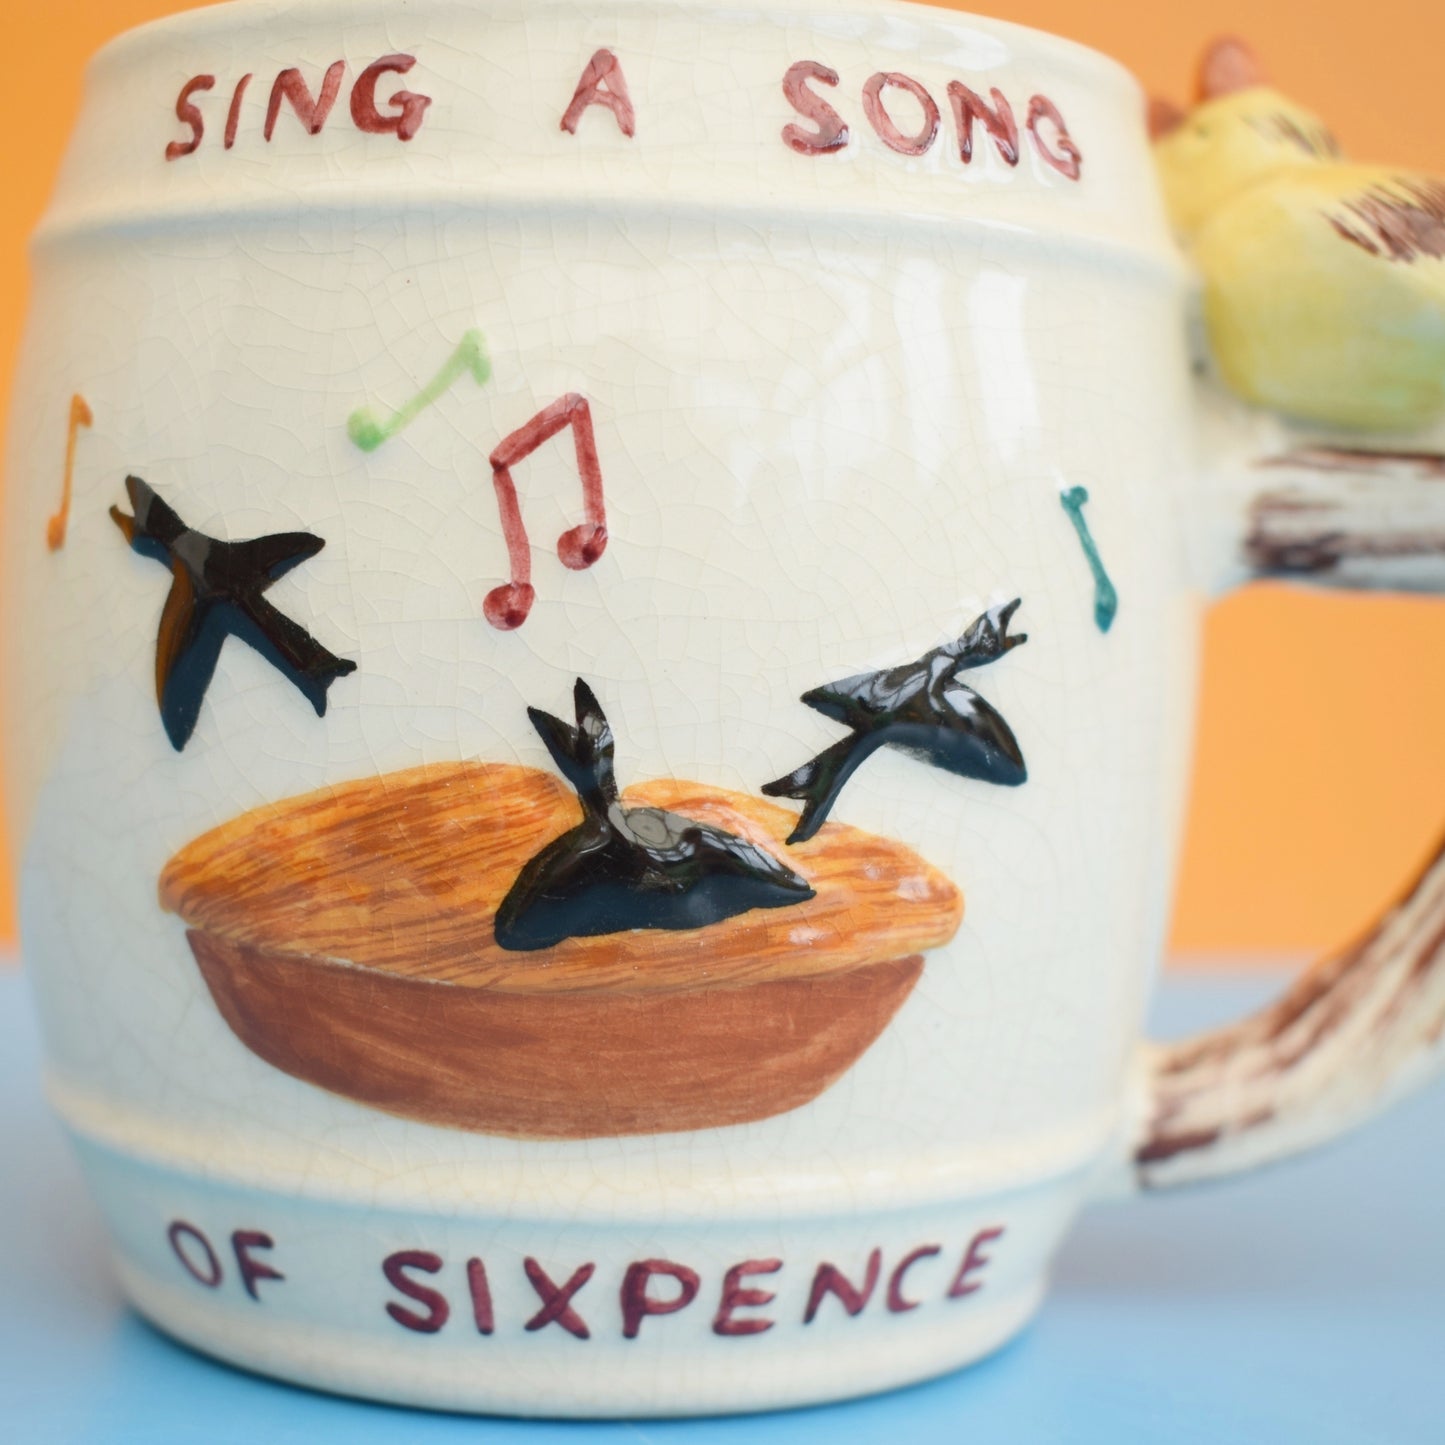 Vintage 1960s Whistle Childs Mug - Sing a Song of Sixpence